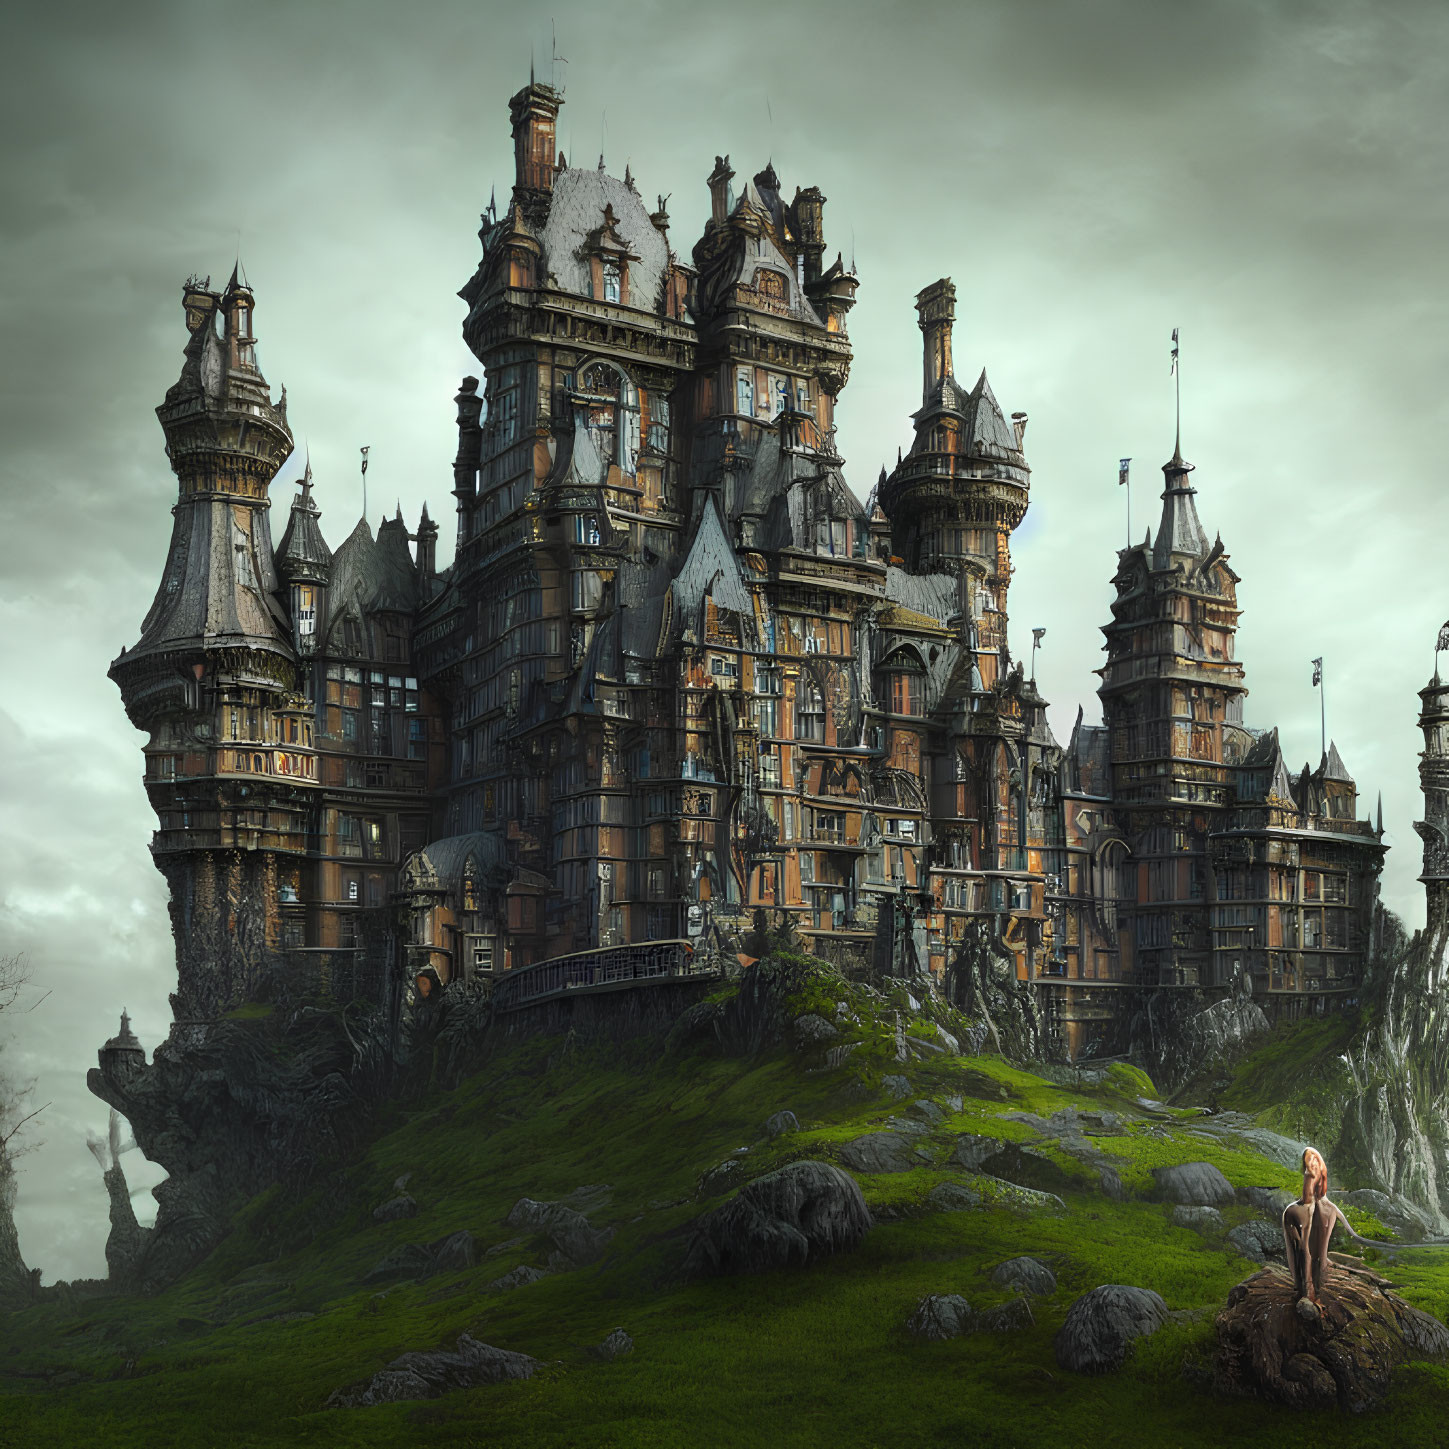 Gothic castle on craggy cliff in misty landscape